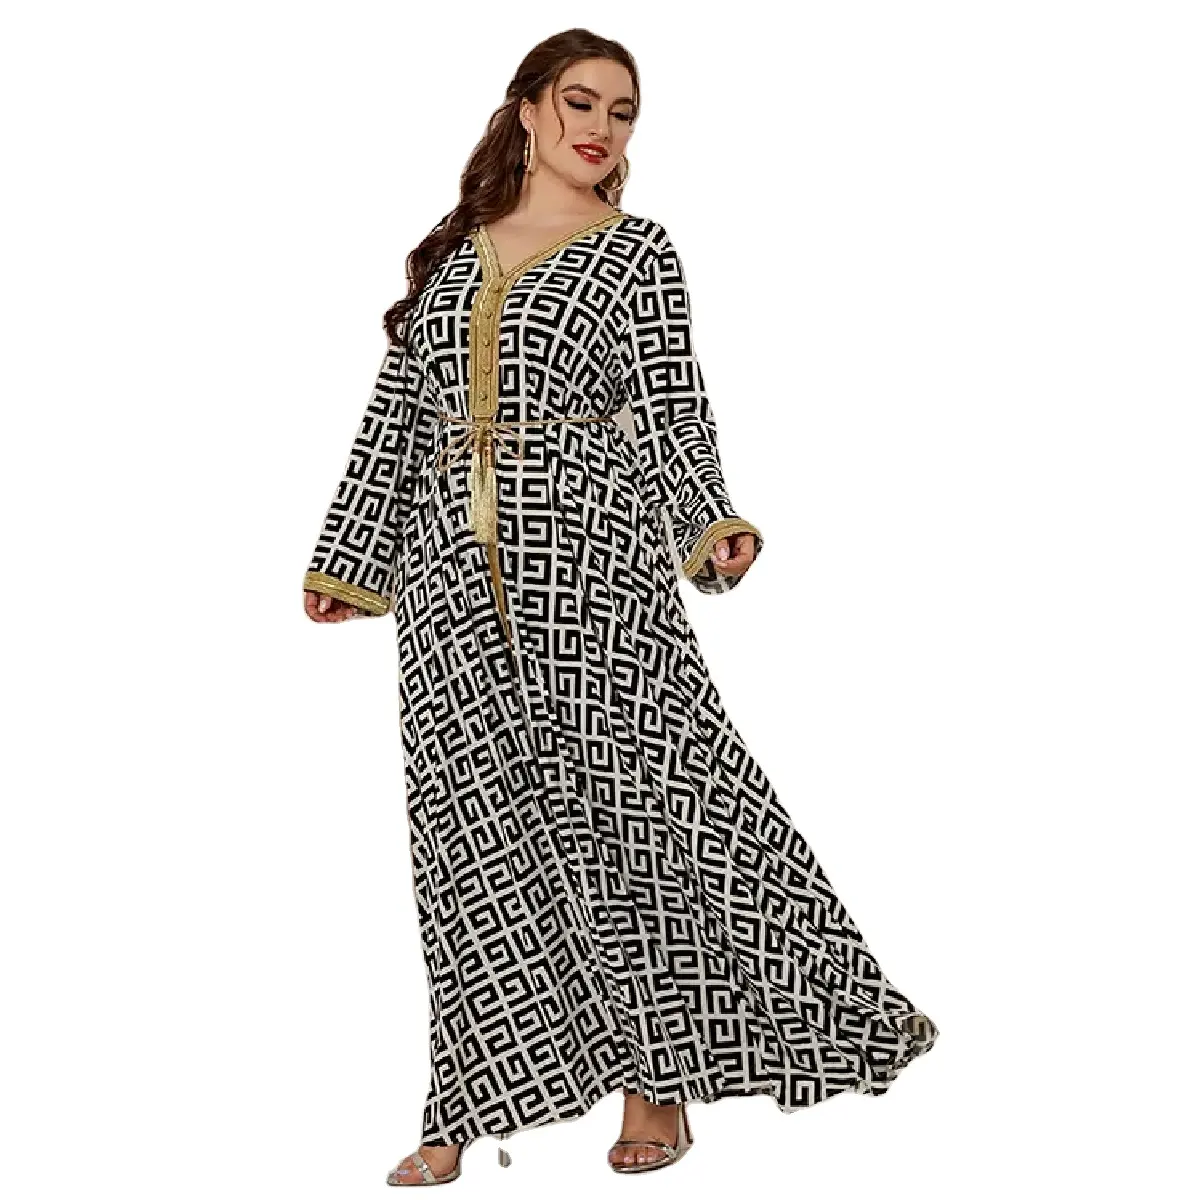 Export Quality Wholesale And Cheap Fully Customizable Long Sleeve V Neck Custom Printed Maxi Dress For Women From Bangladesh